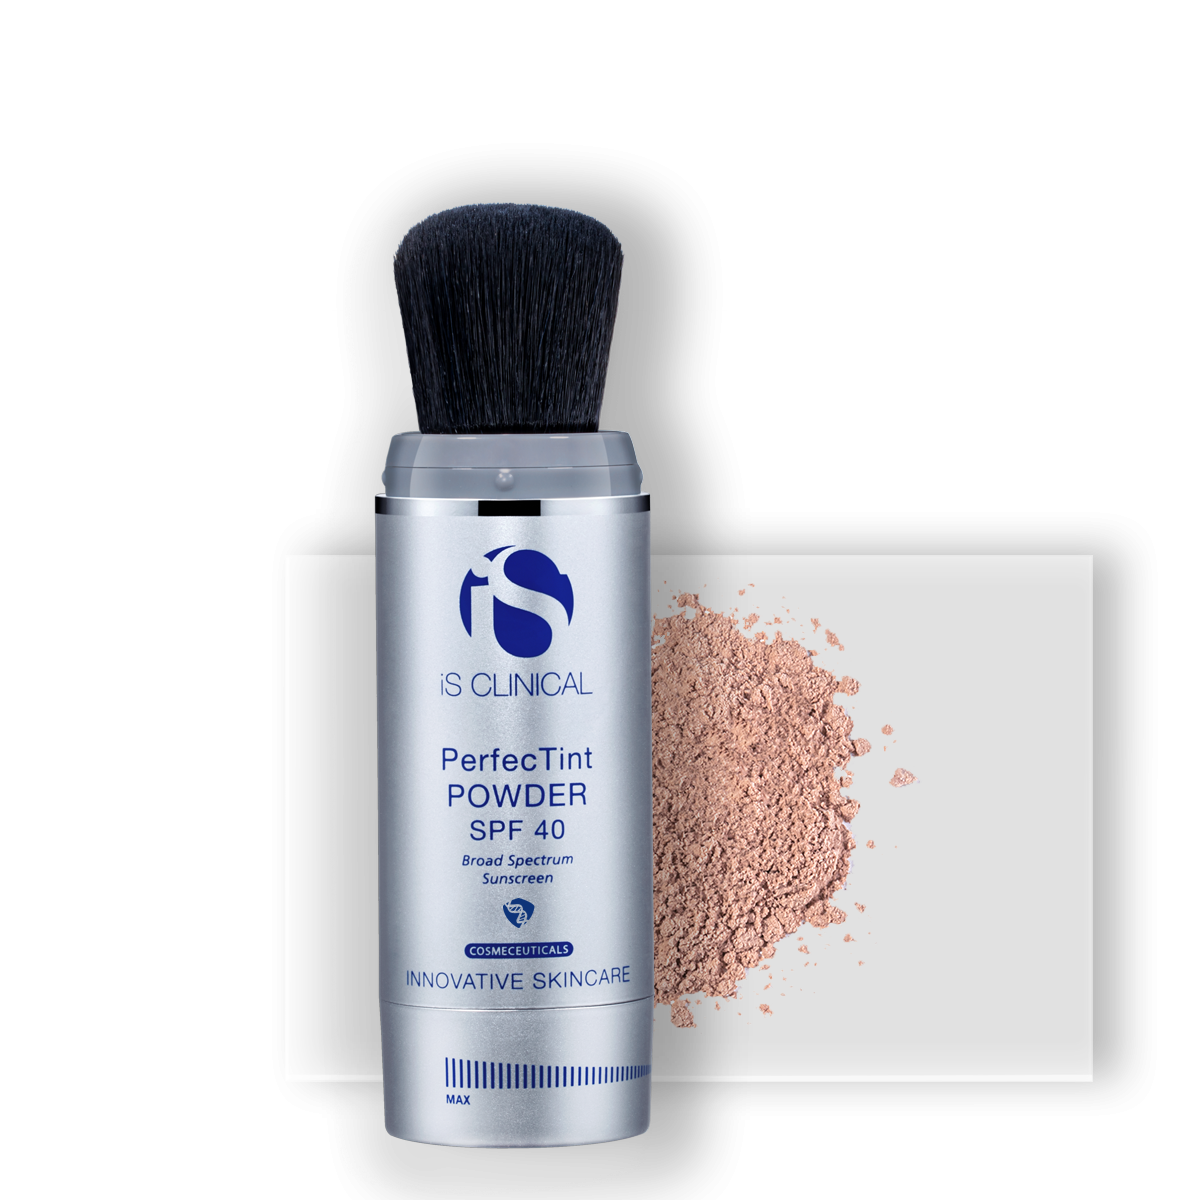 iS Clinical PerfecTint Powder SPF 40 - a cosmetic powder that provides silky smooth broad spectrum coverage to help protect skin against the visible signs of photoaging while minimizing the appearance of pores and absorbing surface oil to create a flawless finish. Shown in beige.